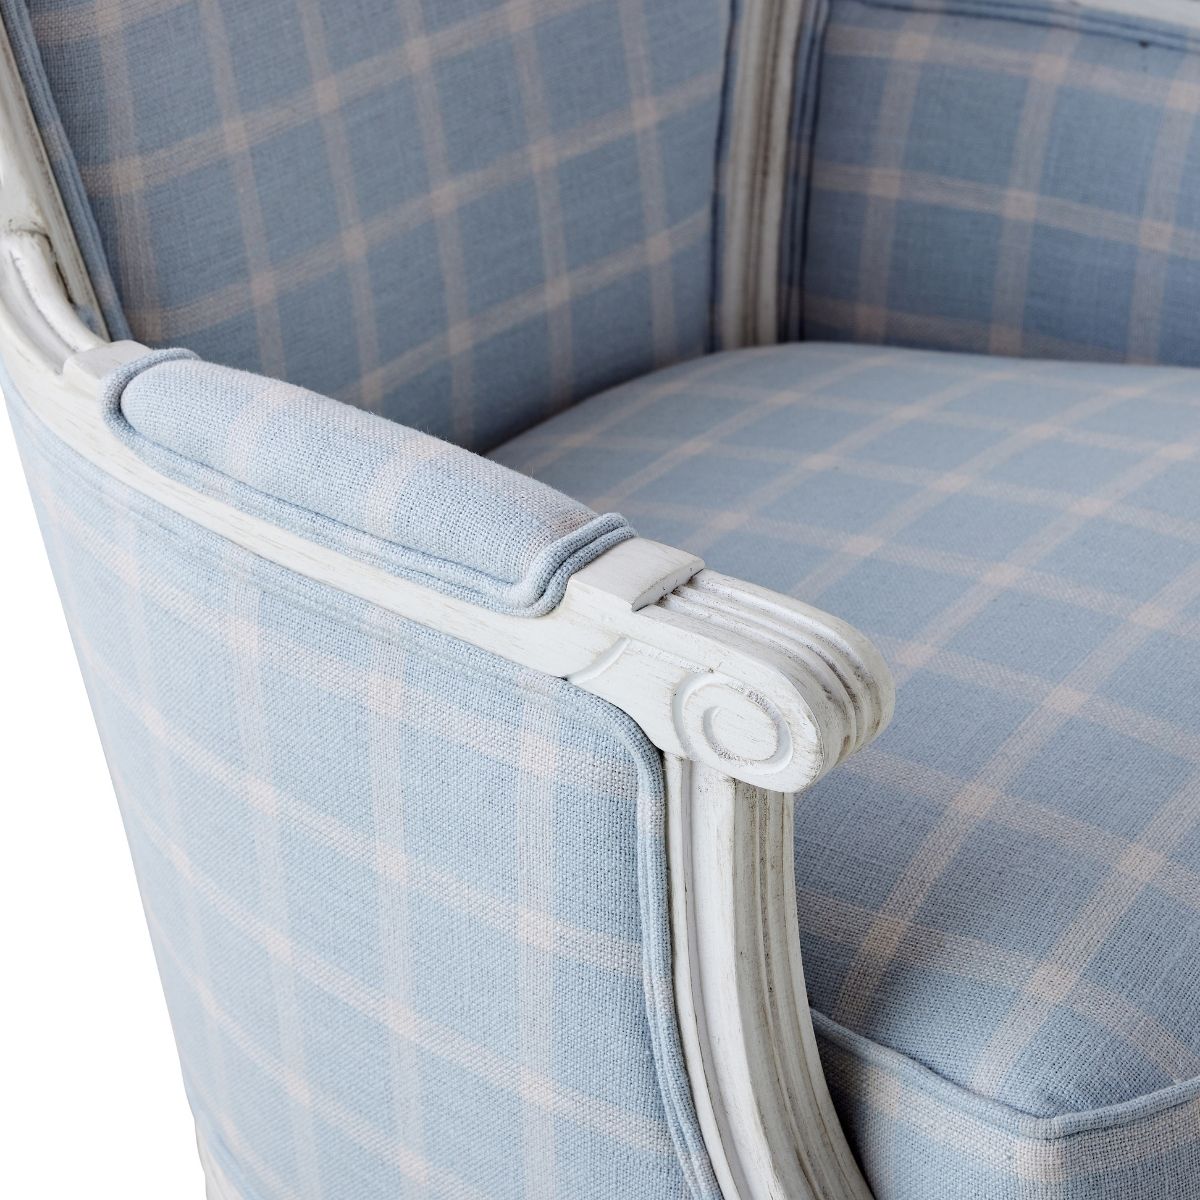 Adele Lounge Chair in Blue Check